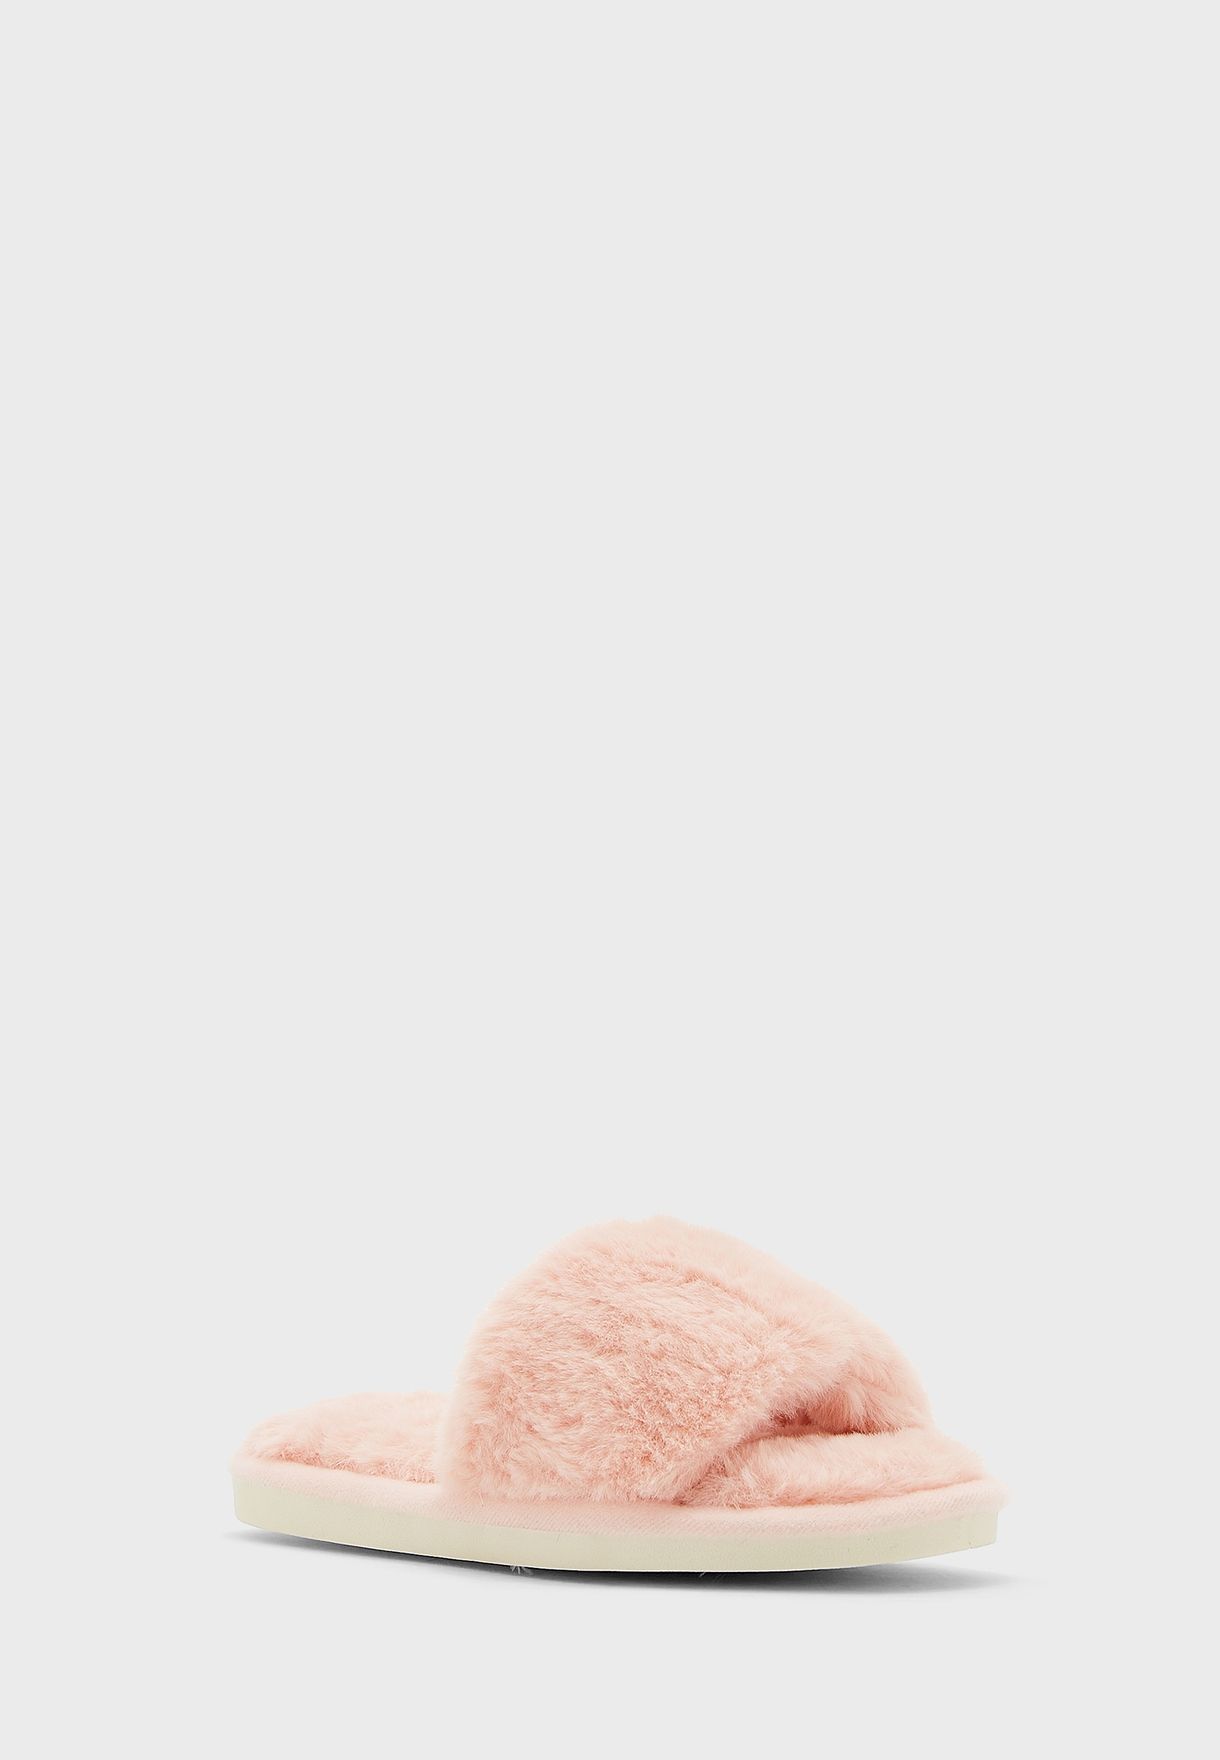 Furry Bedroom Slippers, Eye Cover And Scrunchie Gift Set